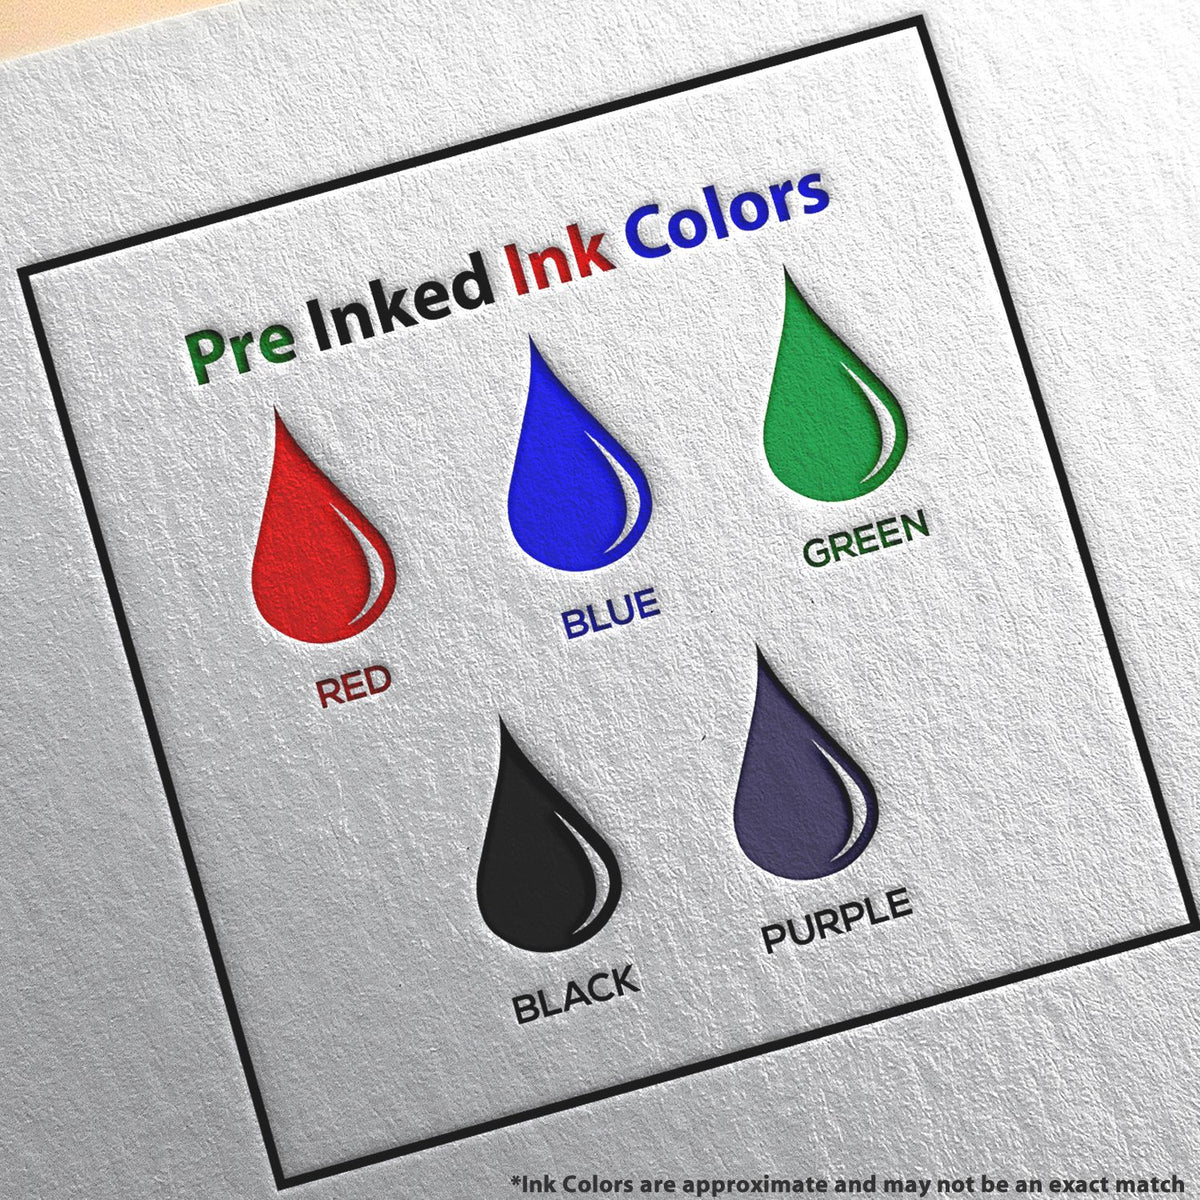 A picture showing the different ink colors or hues available for the Slim Pre-Inked Kentucky Landscape Architect Seal Stamp product.